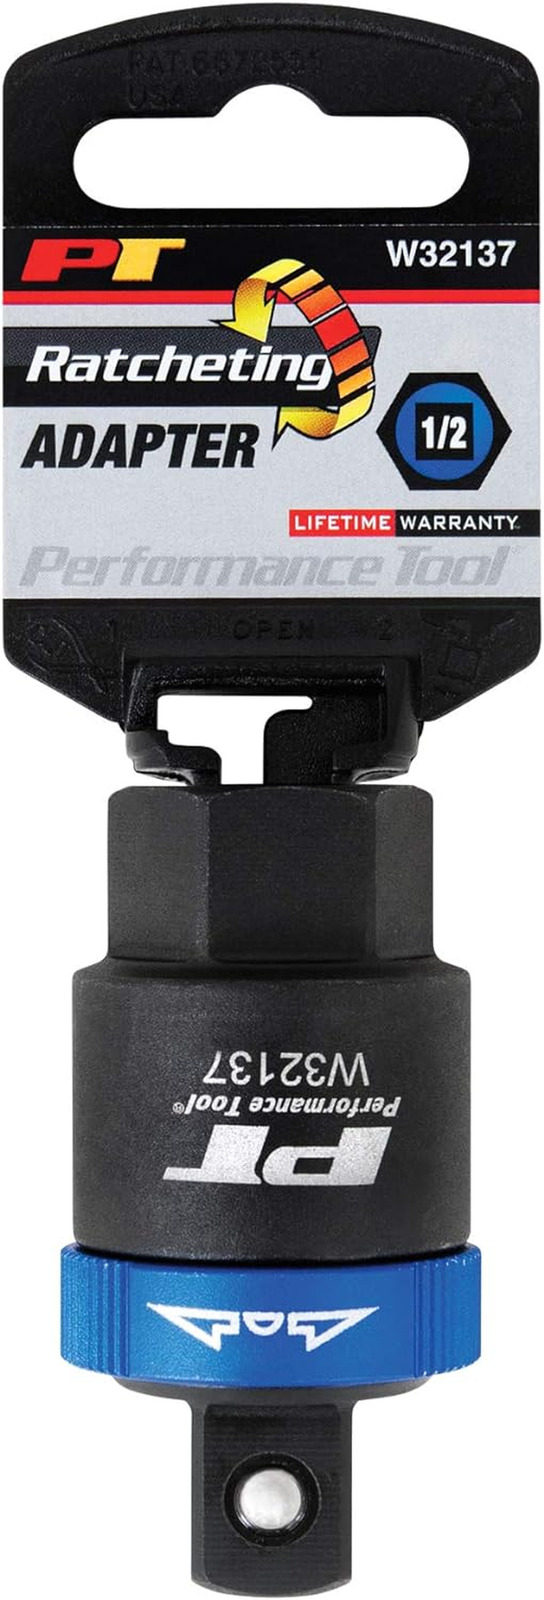 Performance Tool W32137 1/2″ Dr. Ratcheting Adapter